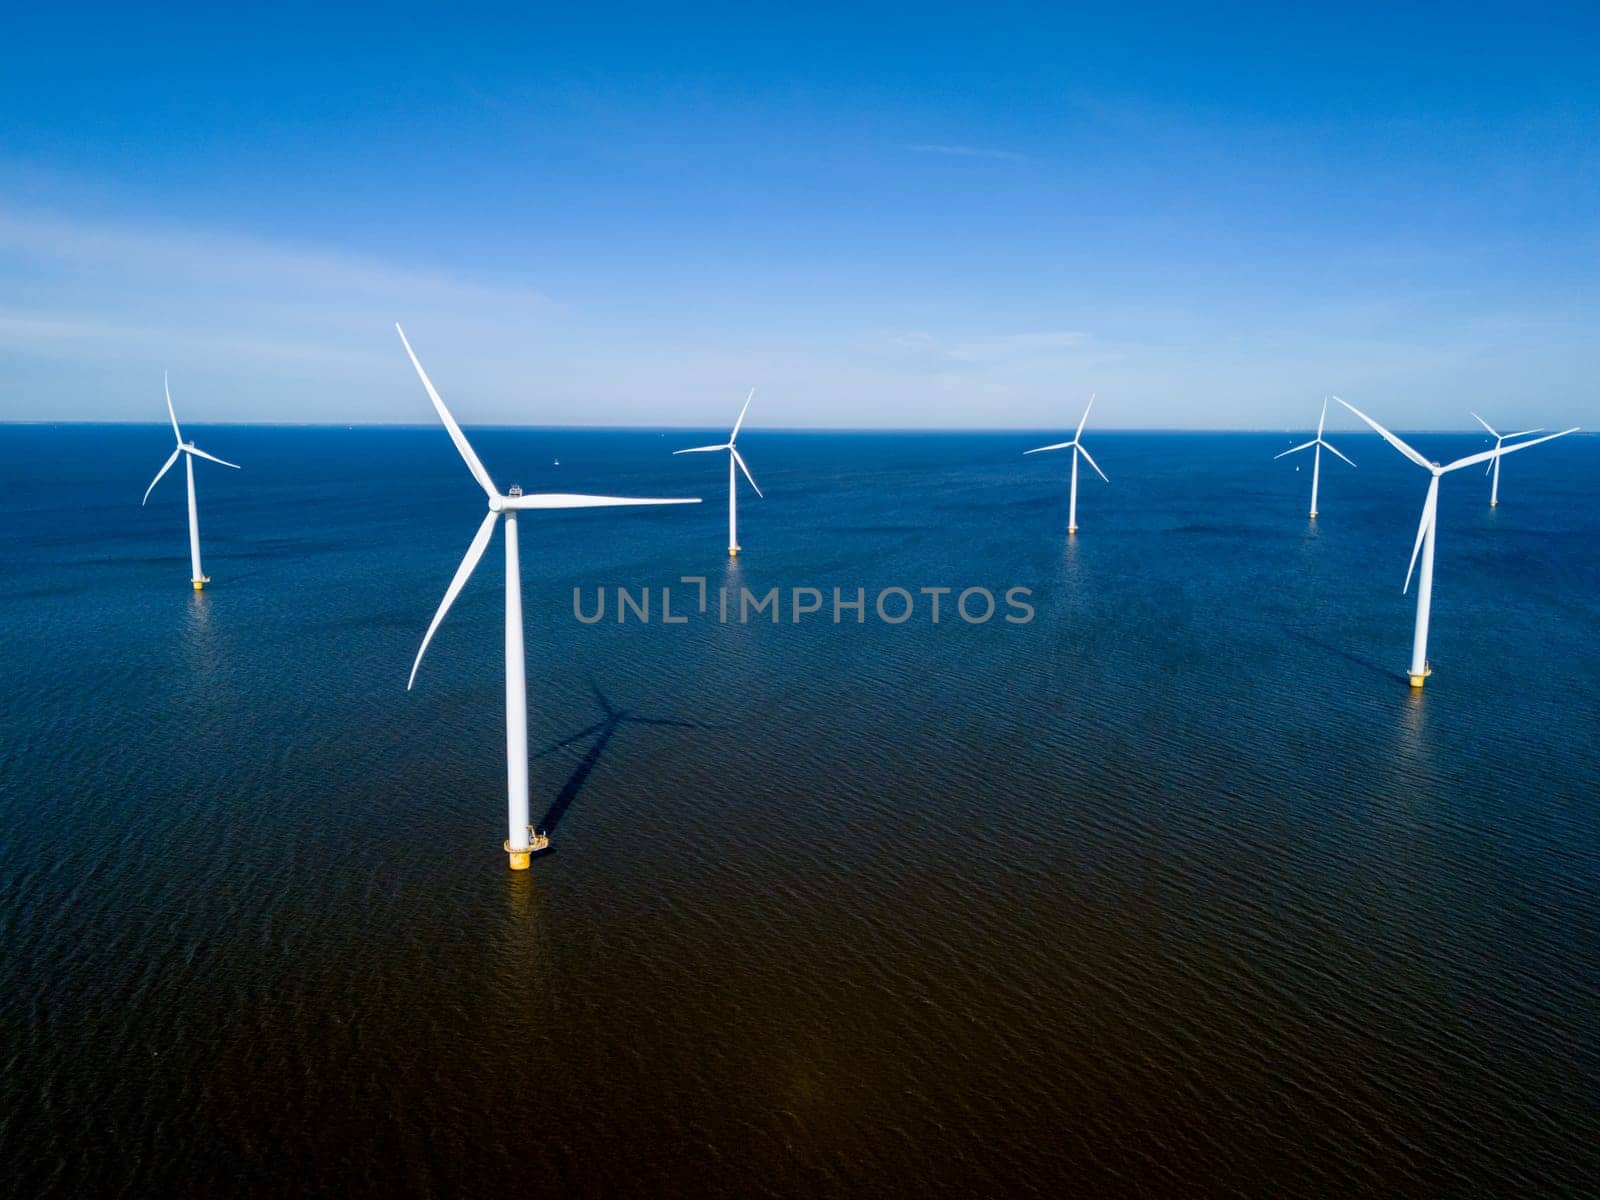 A group of wind turbines stand tall in the ocean, harnessing the power of the wind to generate renewable energy in the Netherlands Flevoland during the vibrant season of Spring.